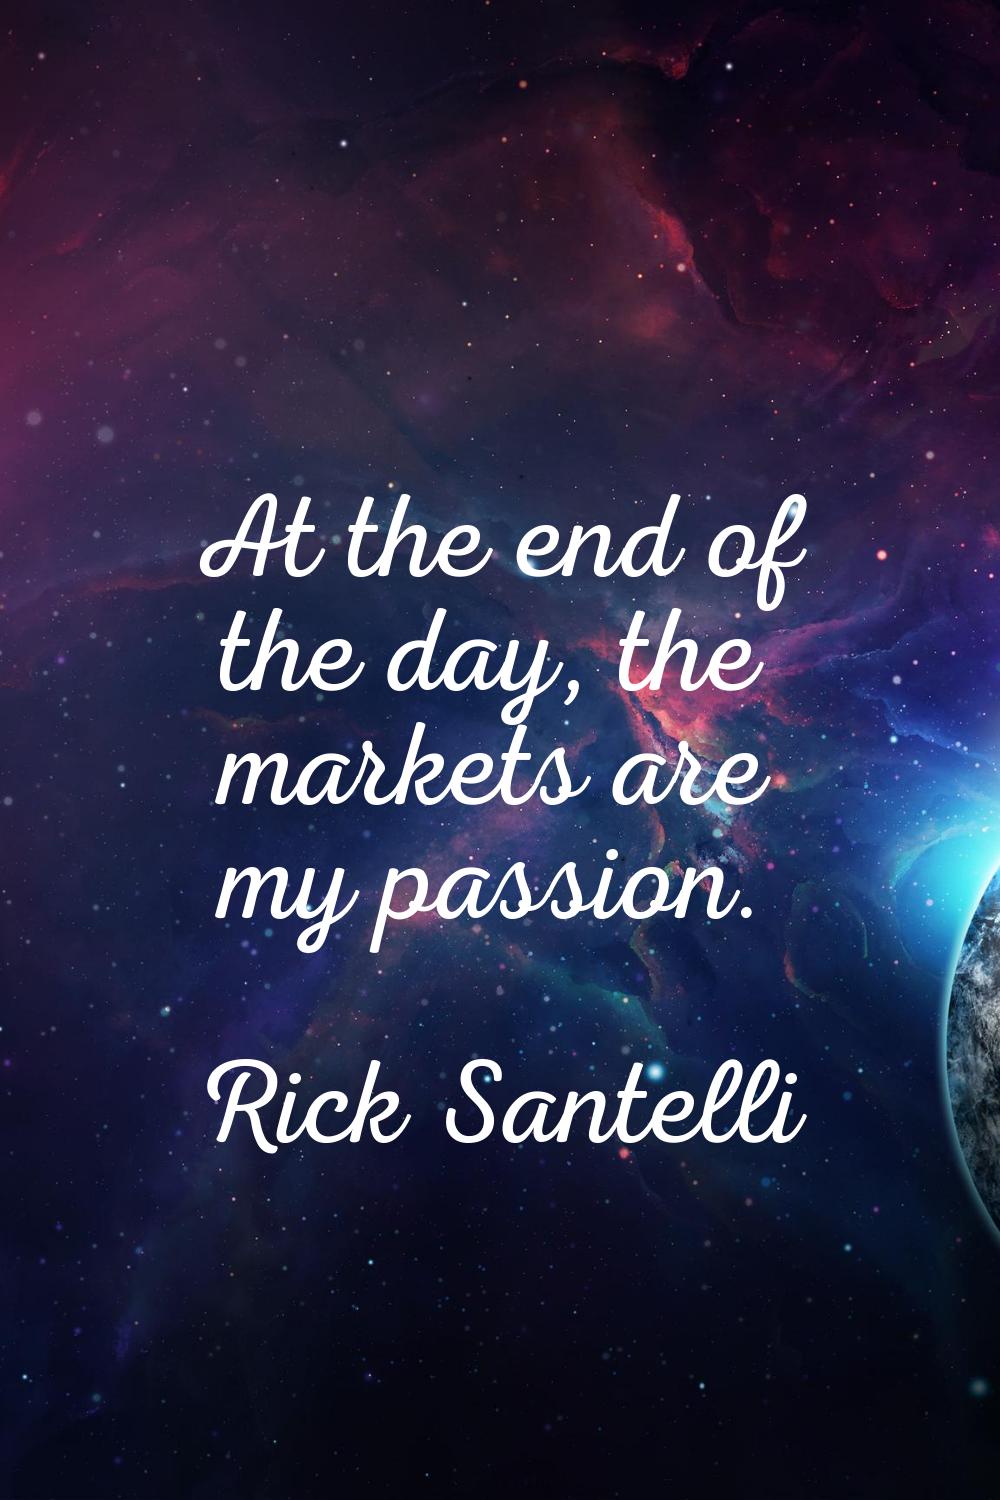 At the end of the day, the markets are my passion.